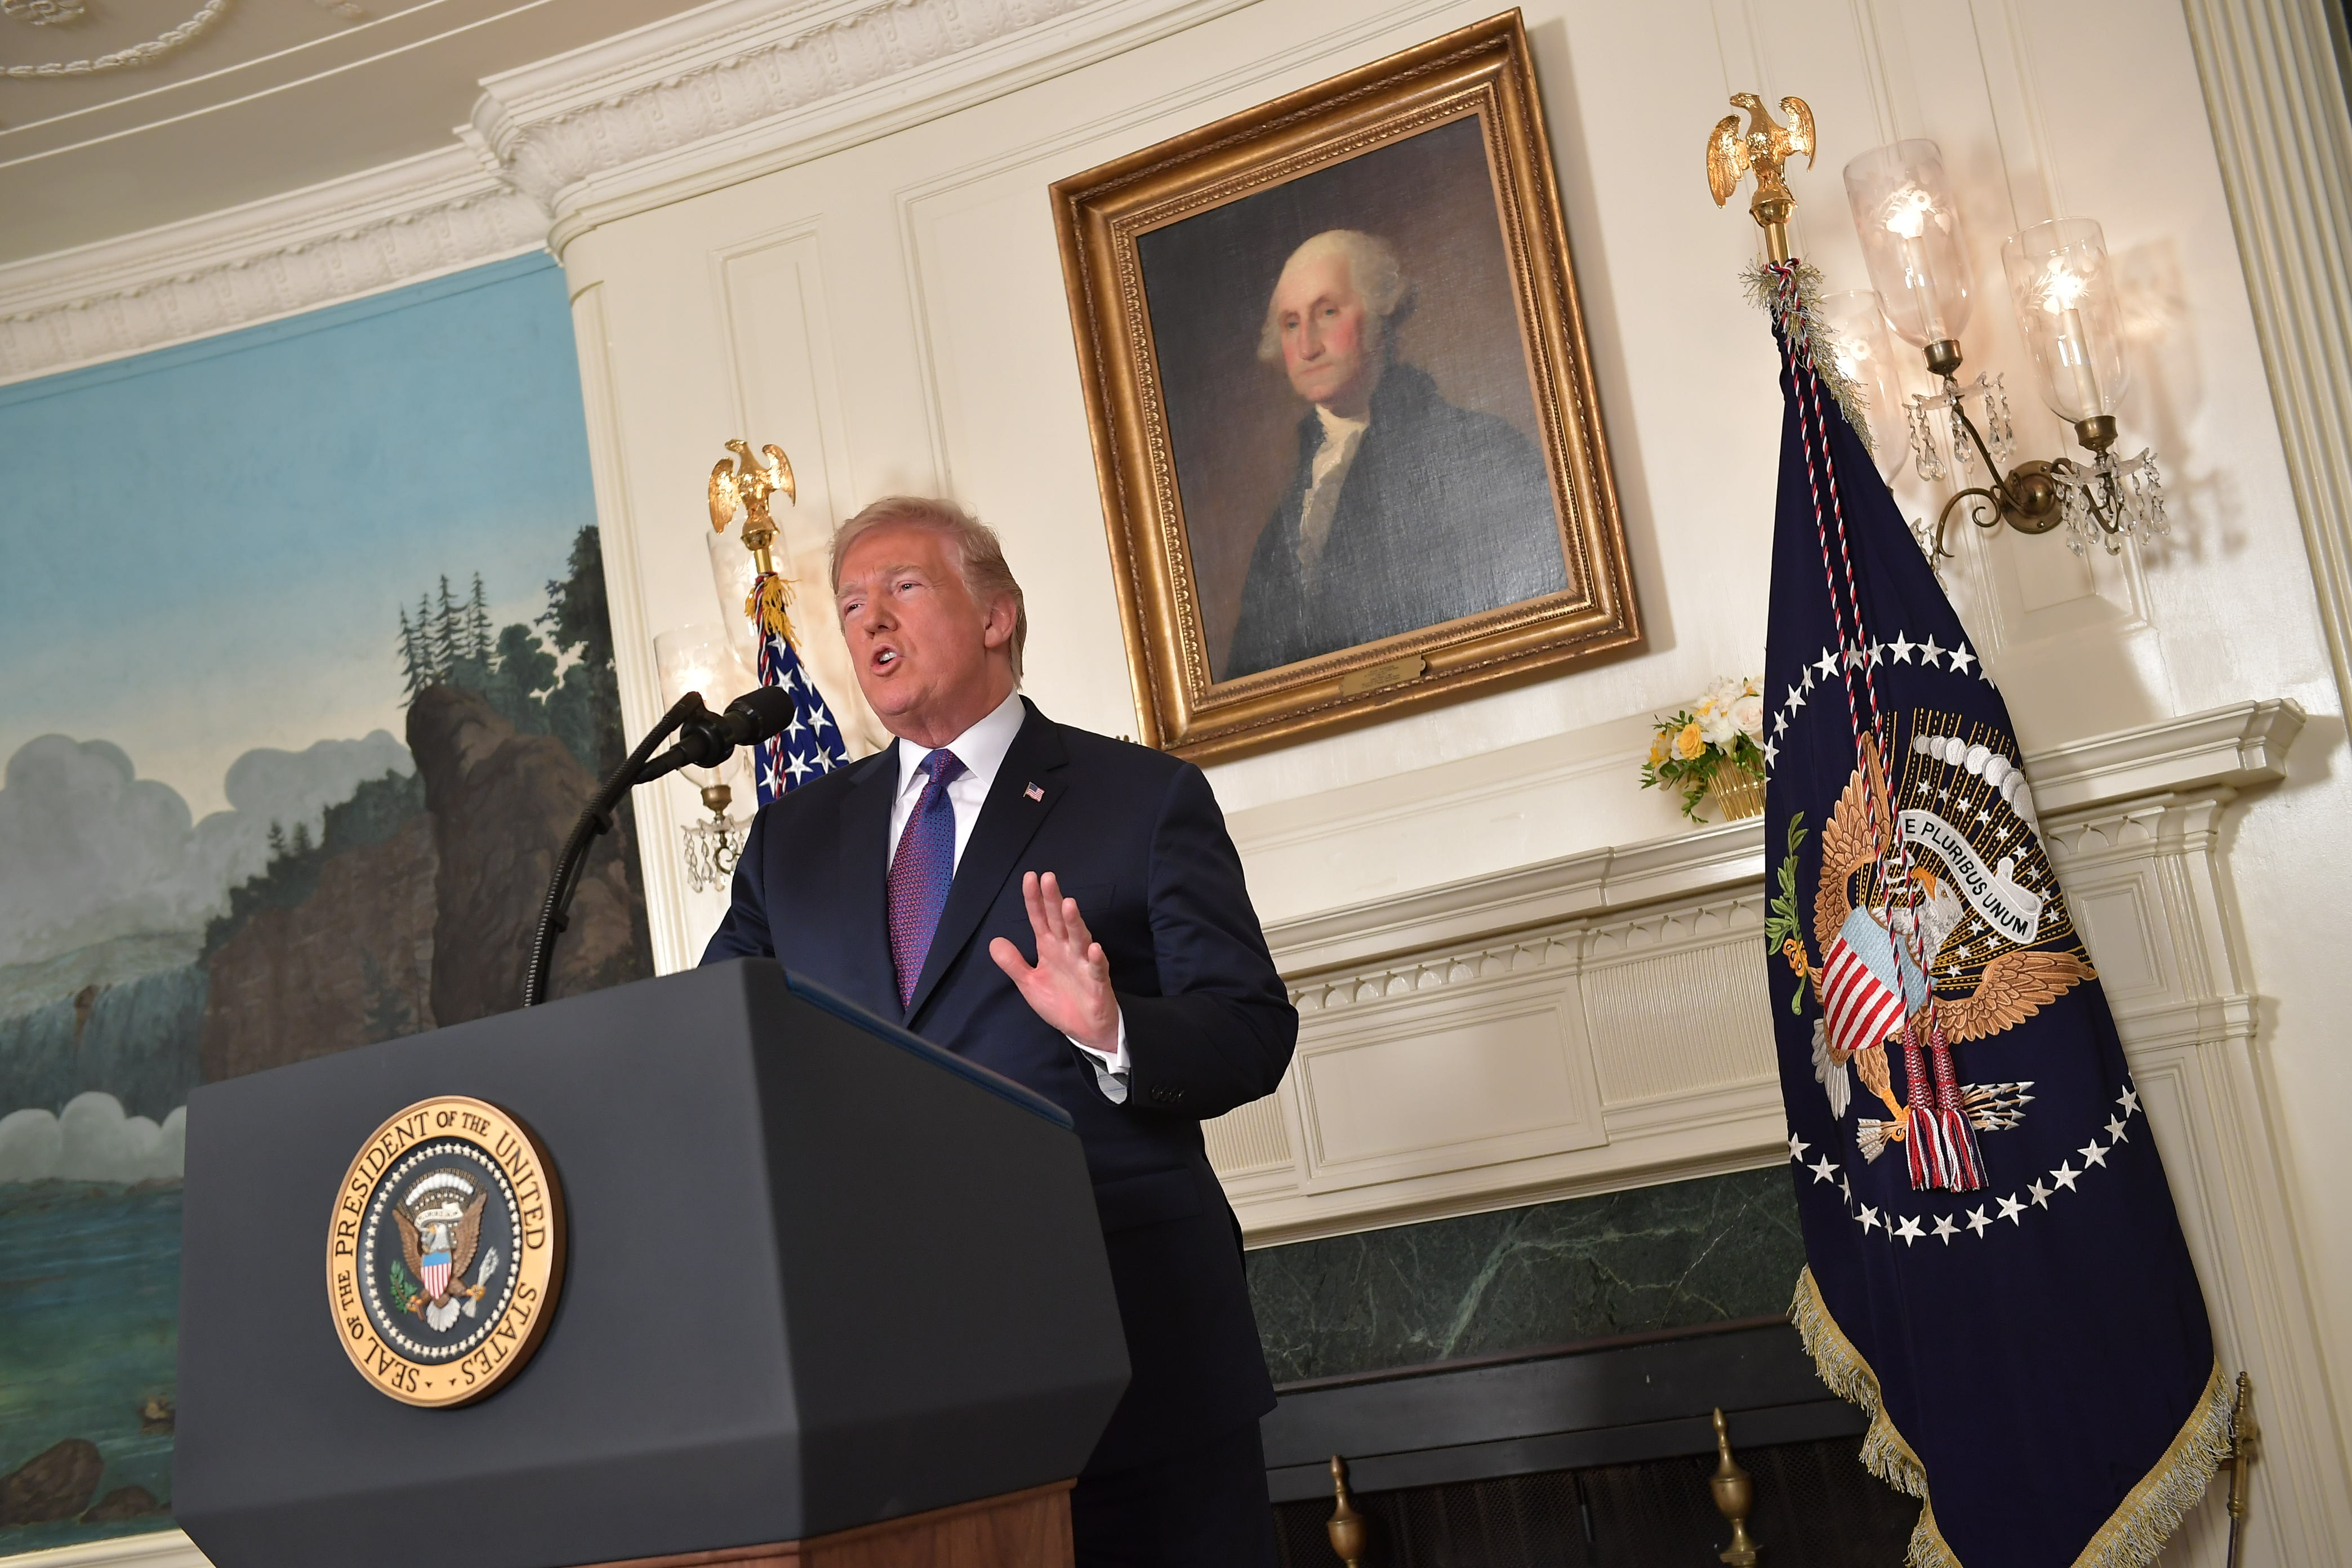 President Trump addresses the nation on the situation in Syria at the White House on April 13, 2018. (Mandel Ngan—AFP/Getty Images)